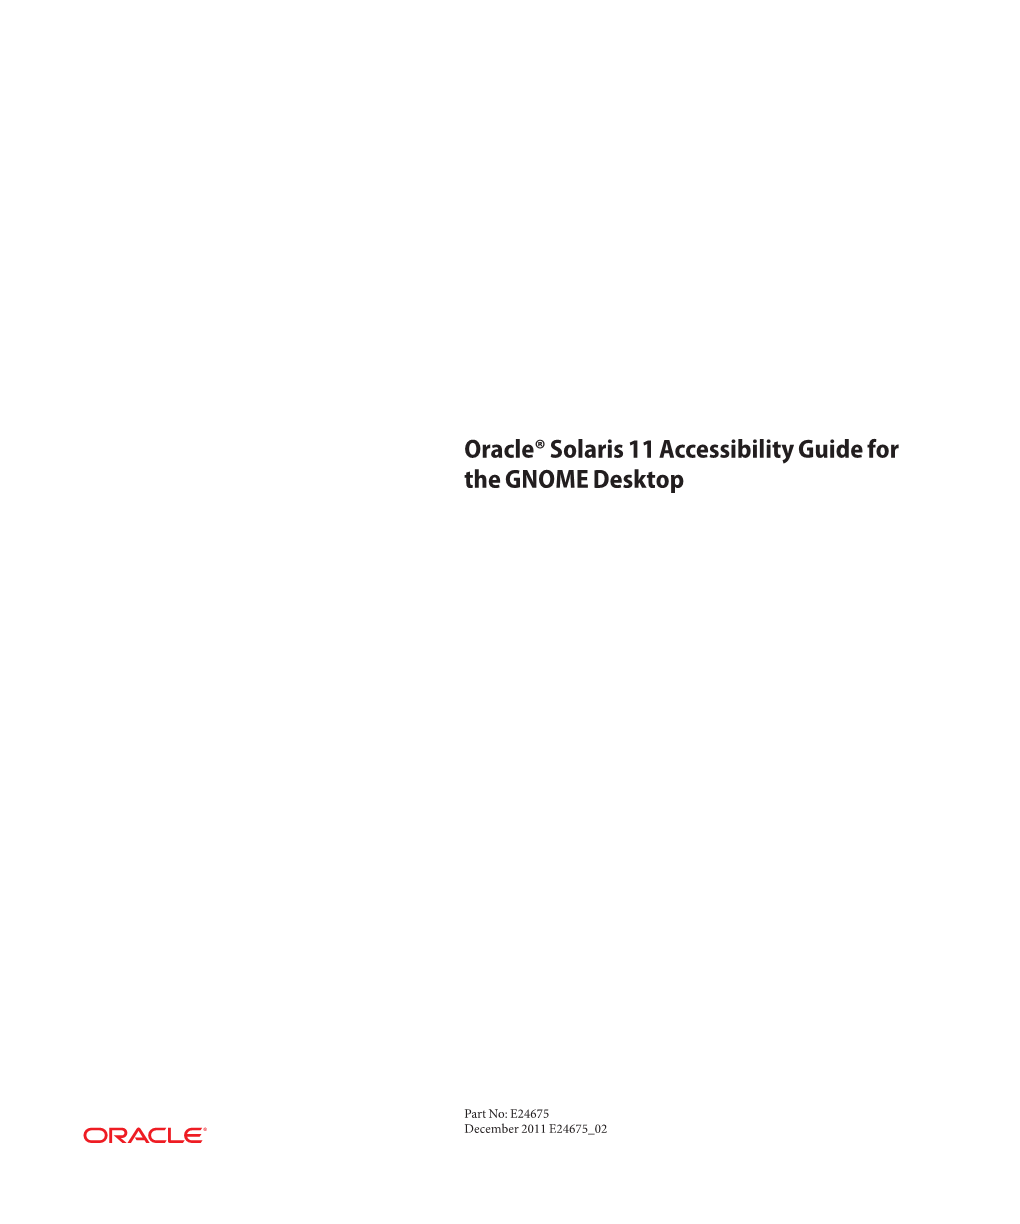 Oracle Solaris 11 Accessibility Guide for the GNOME Desktop • December 2011 E24675 02 Contents